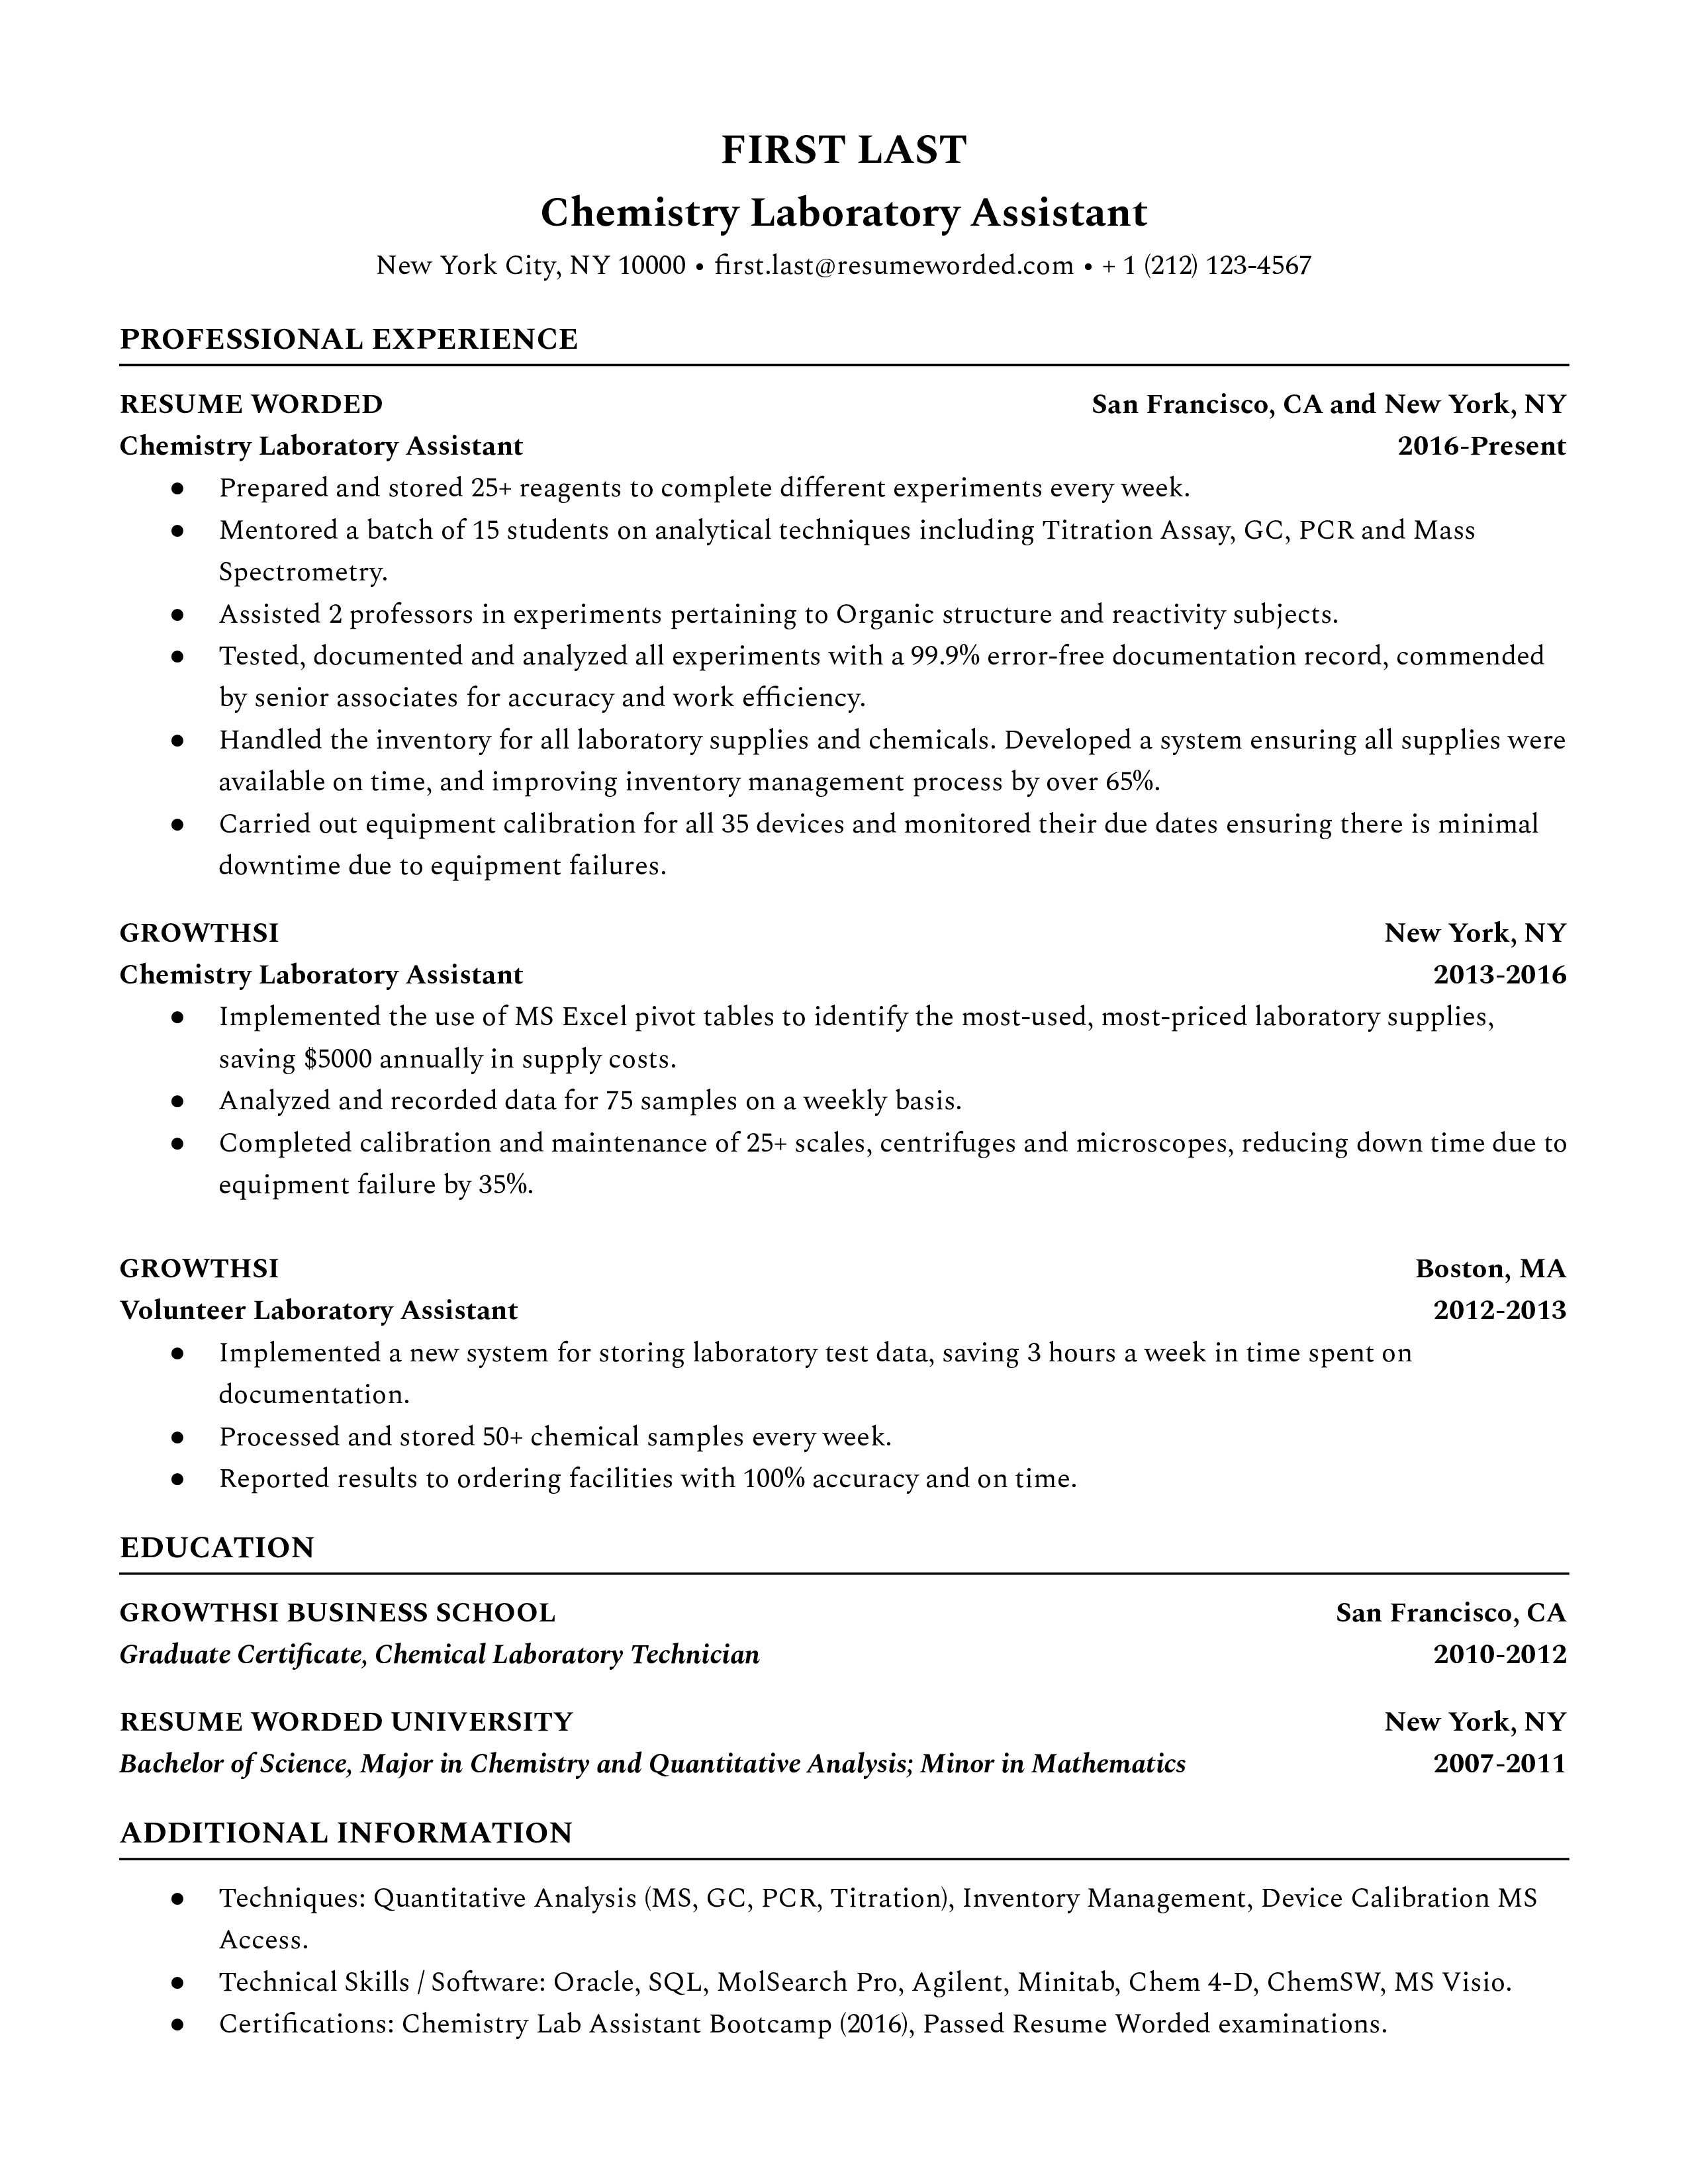 A resume for a chemistry lab assistant with a degree in chemistry and experience as a volunteer laboratory assistant.